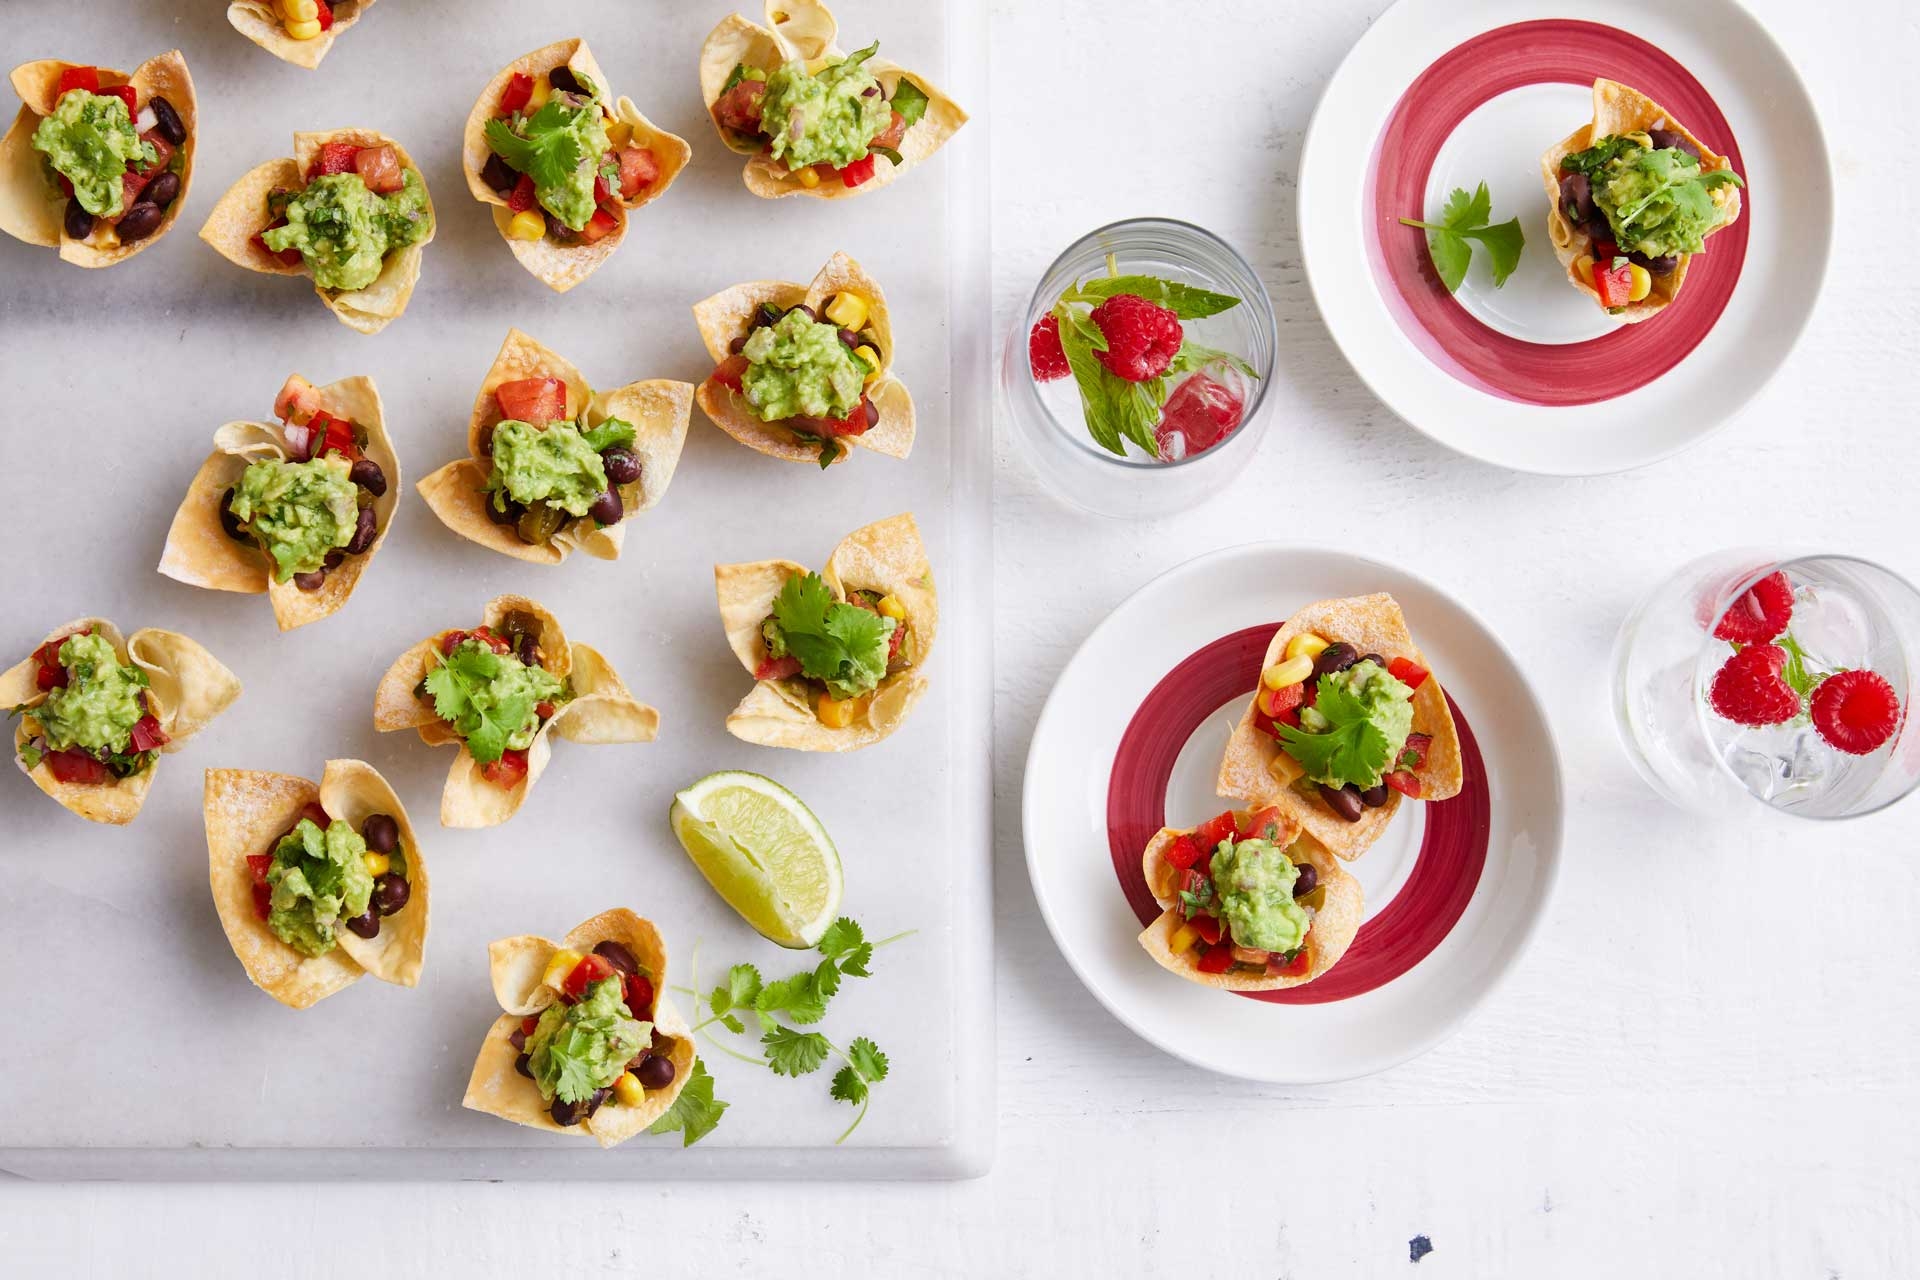 Serving board with open cup shaped wonton wrappers filled with a mix of fresh salad veggies and herbs, with coriander and lemon, a delicious appetizer.